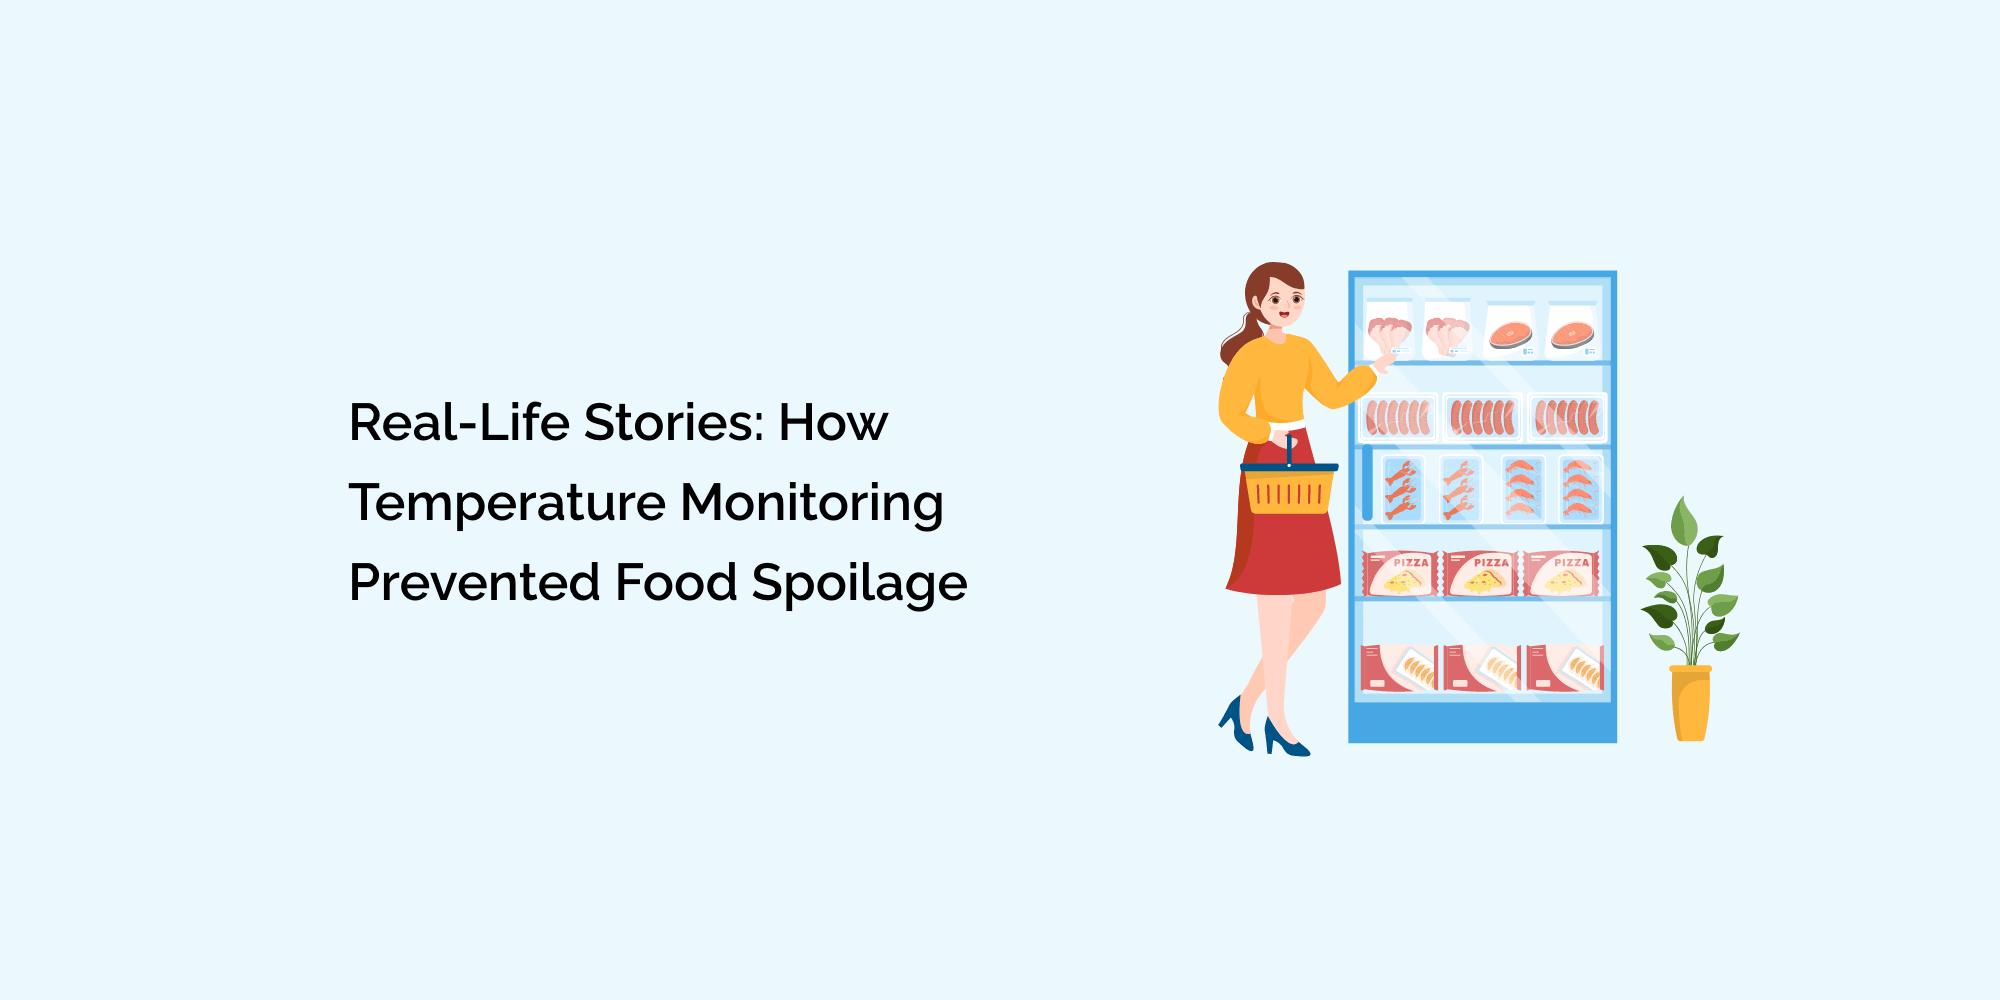 Real-Life Stories: How Temperature Monitoring Prevented Food Spoilage